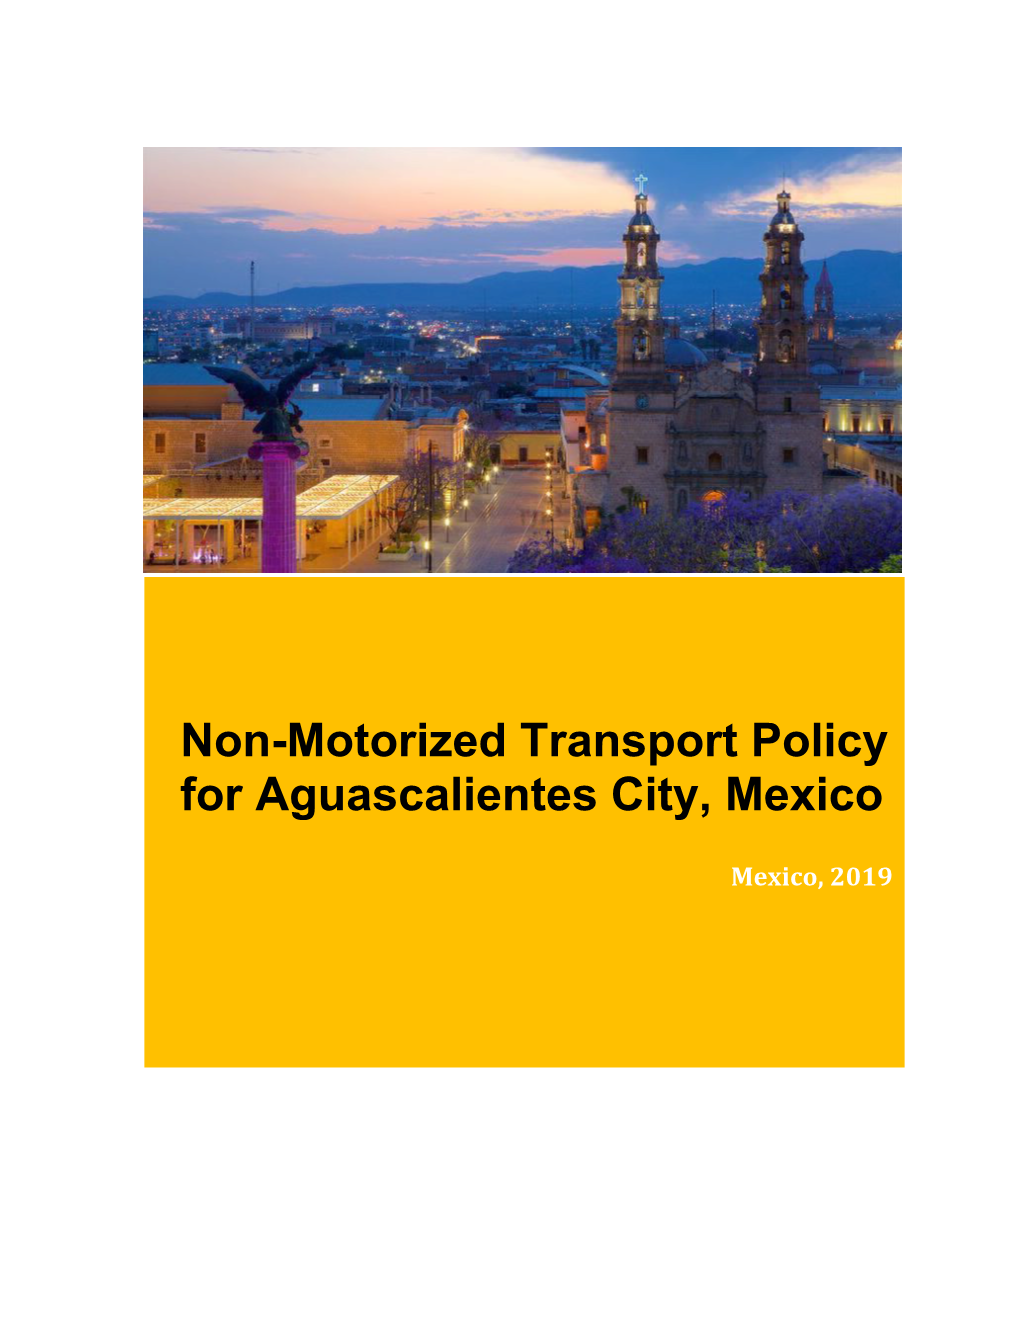 Non-Motorized Transport Policy for Aguascalientes City, Mexico